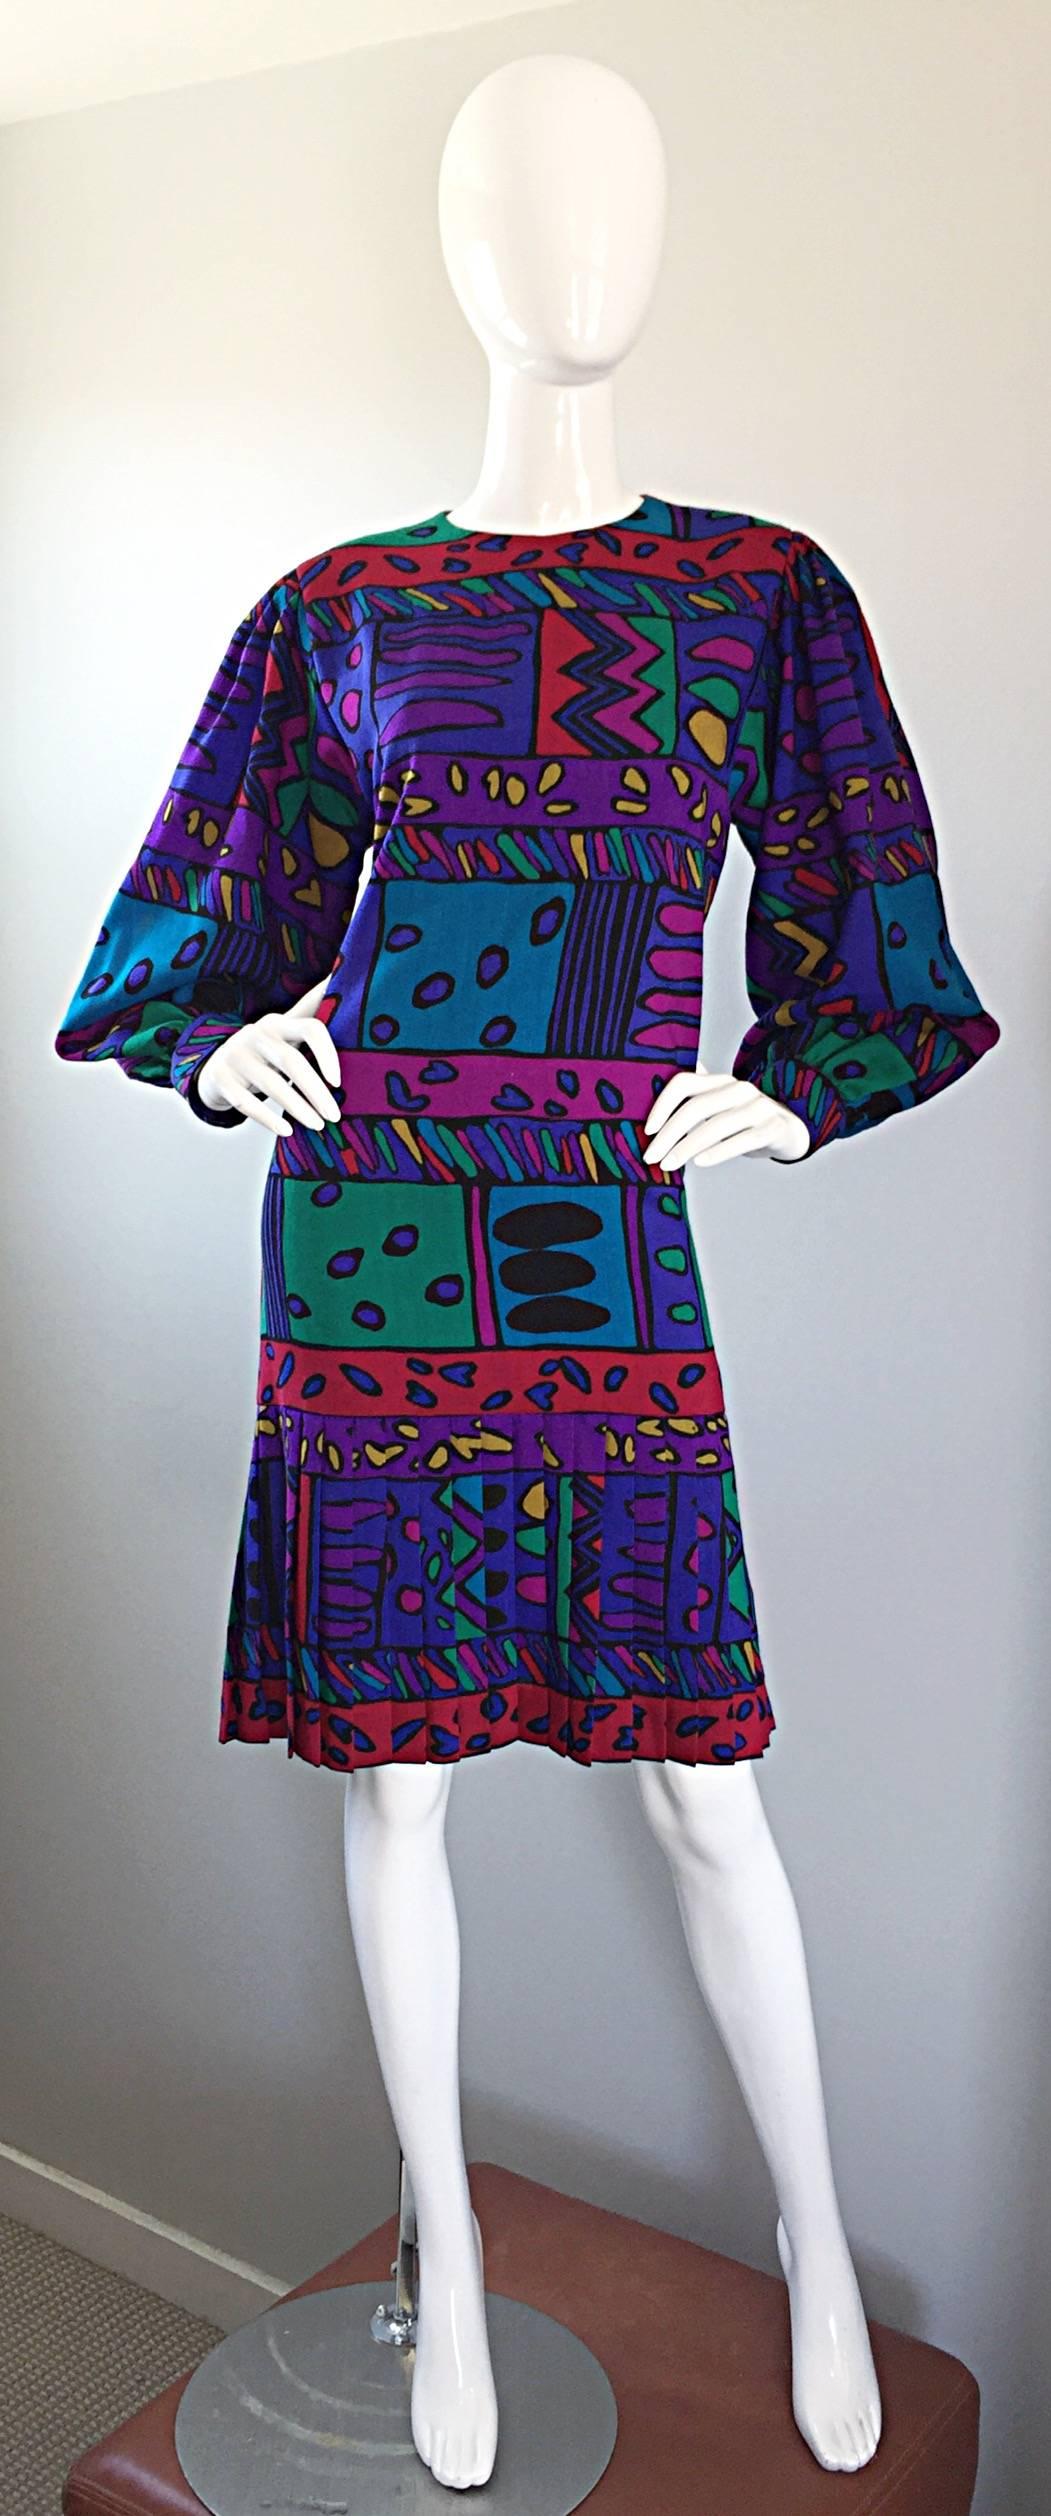 Such a fun HELGA HOWIE colorful op-art dress! Soft cotton with vibrant hues of purple, blue, pink, fuchsia, green, red, yellow and orange! Hearts in various shapes and sizes printed throughout. Flattering drop waist, with knife pleats at the hem of